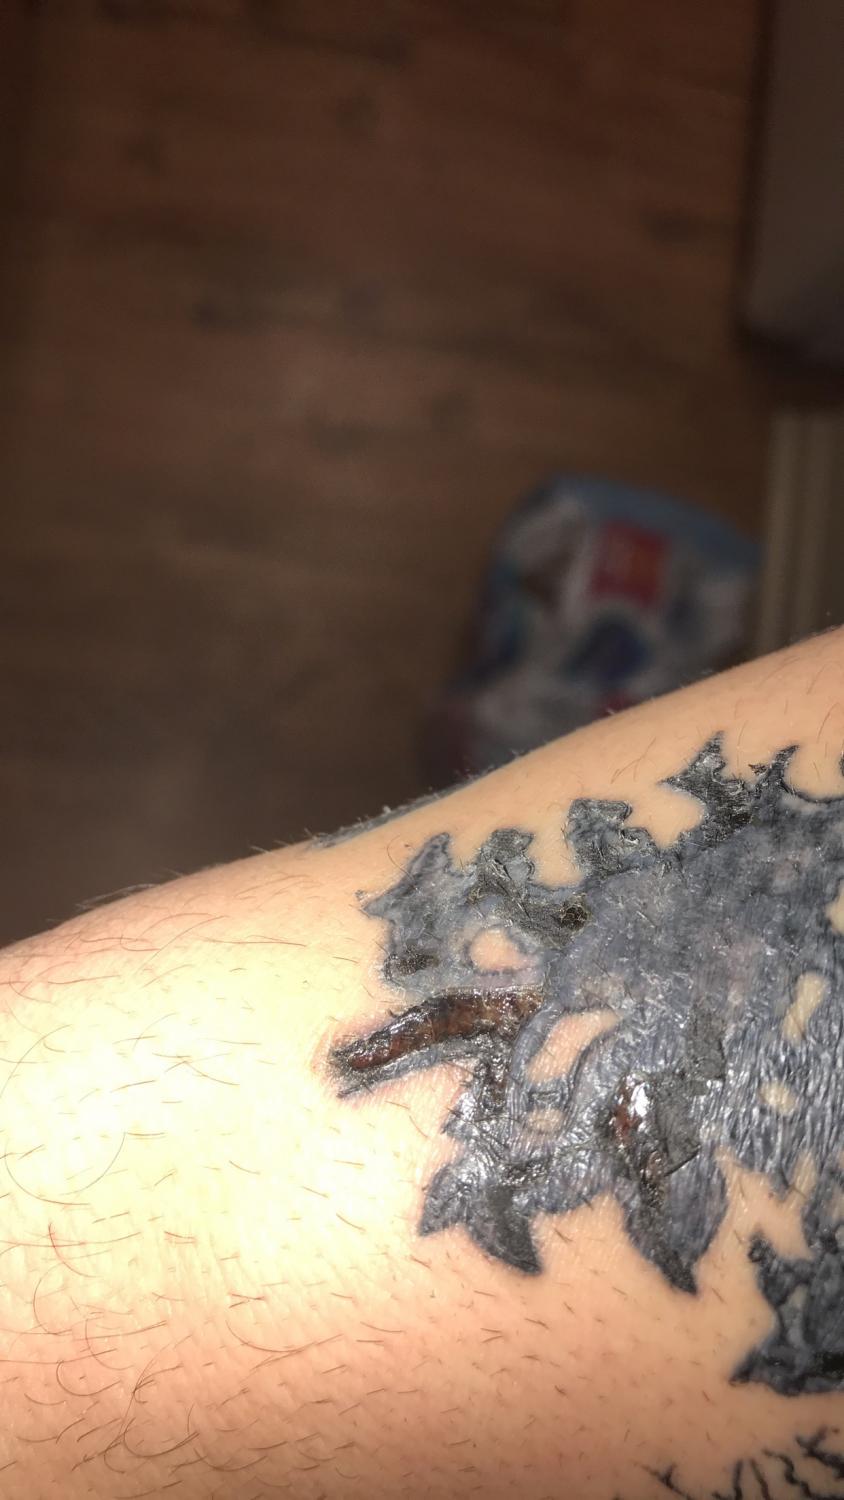 Infected Tattoo Stages Signs of Infection from Tattoos and After Tattoo  Removal  Removery